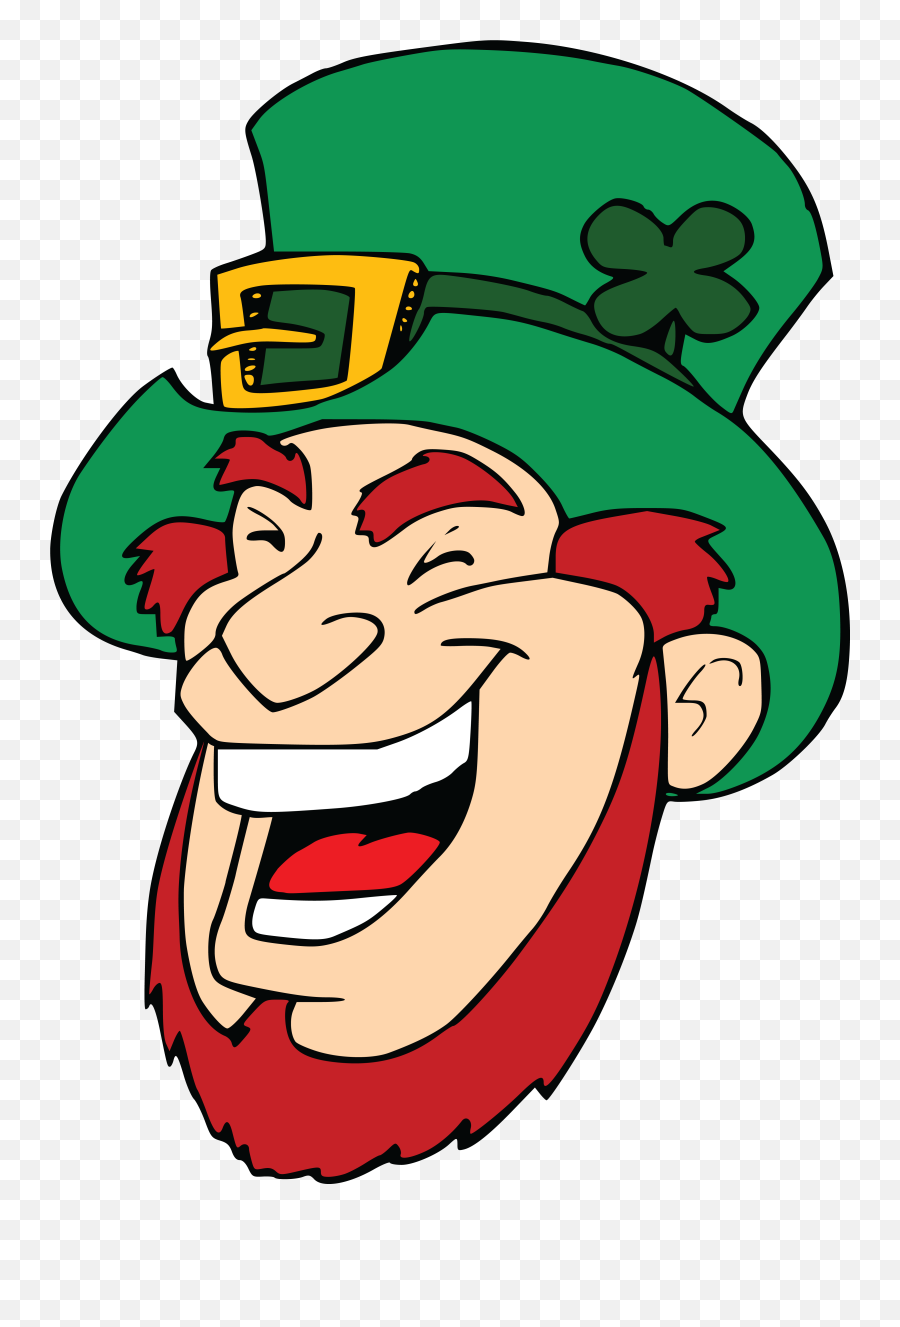 Free Clipart Of A Laughing Leprechaun Face - Leprechaun Face Funny Happy St Patricks Day Emoji,How To Make A Laughing Emoji